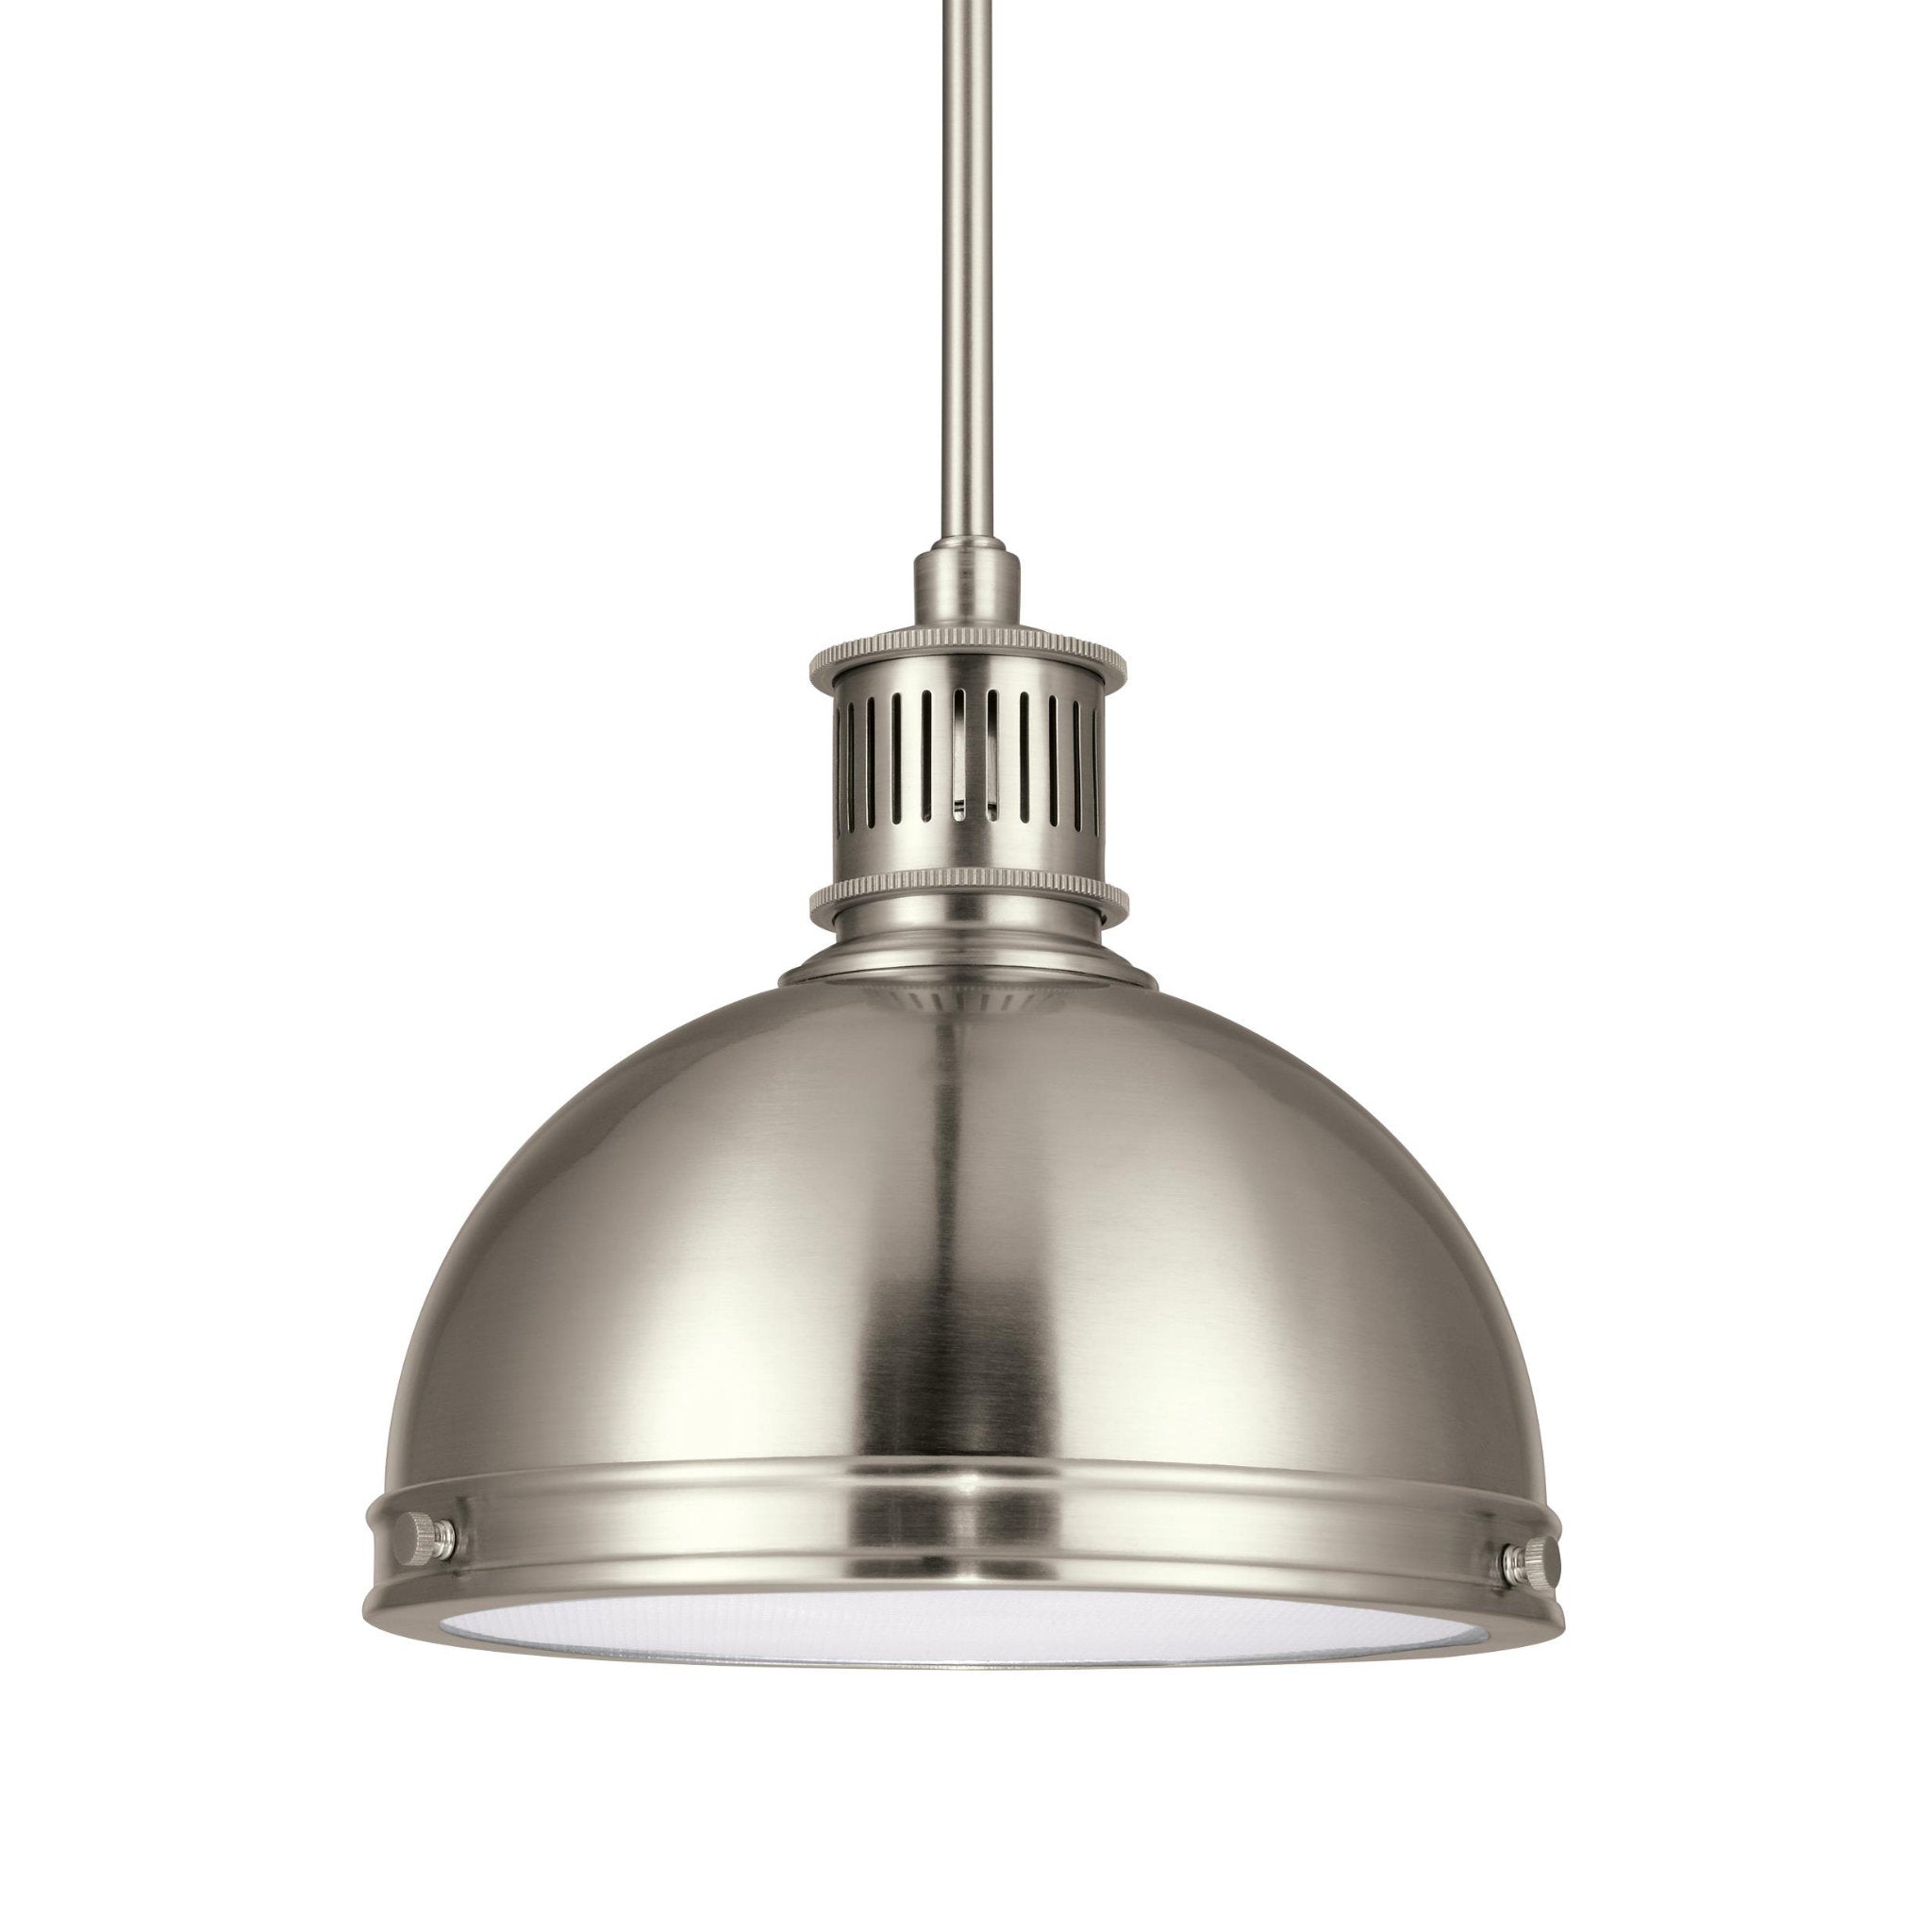 Pratt Street Metal One Light Pendant LED Contemporary 8.5" Height Steel Round Clear Textured Shade in Brushed Nickel